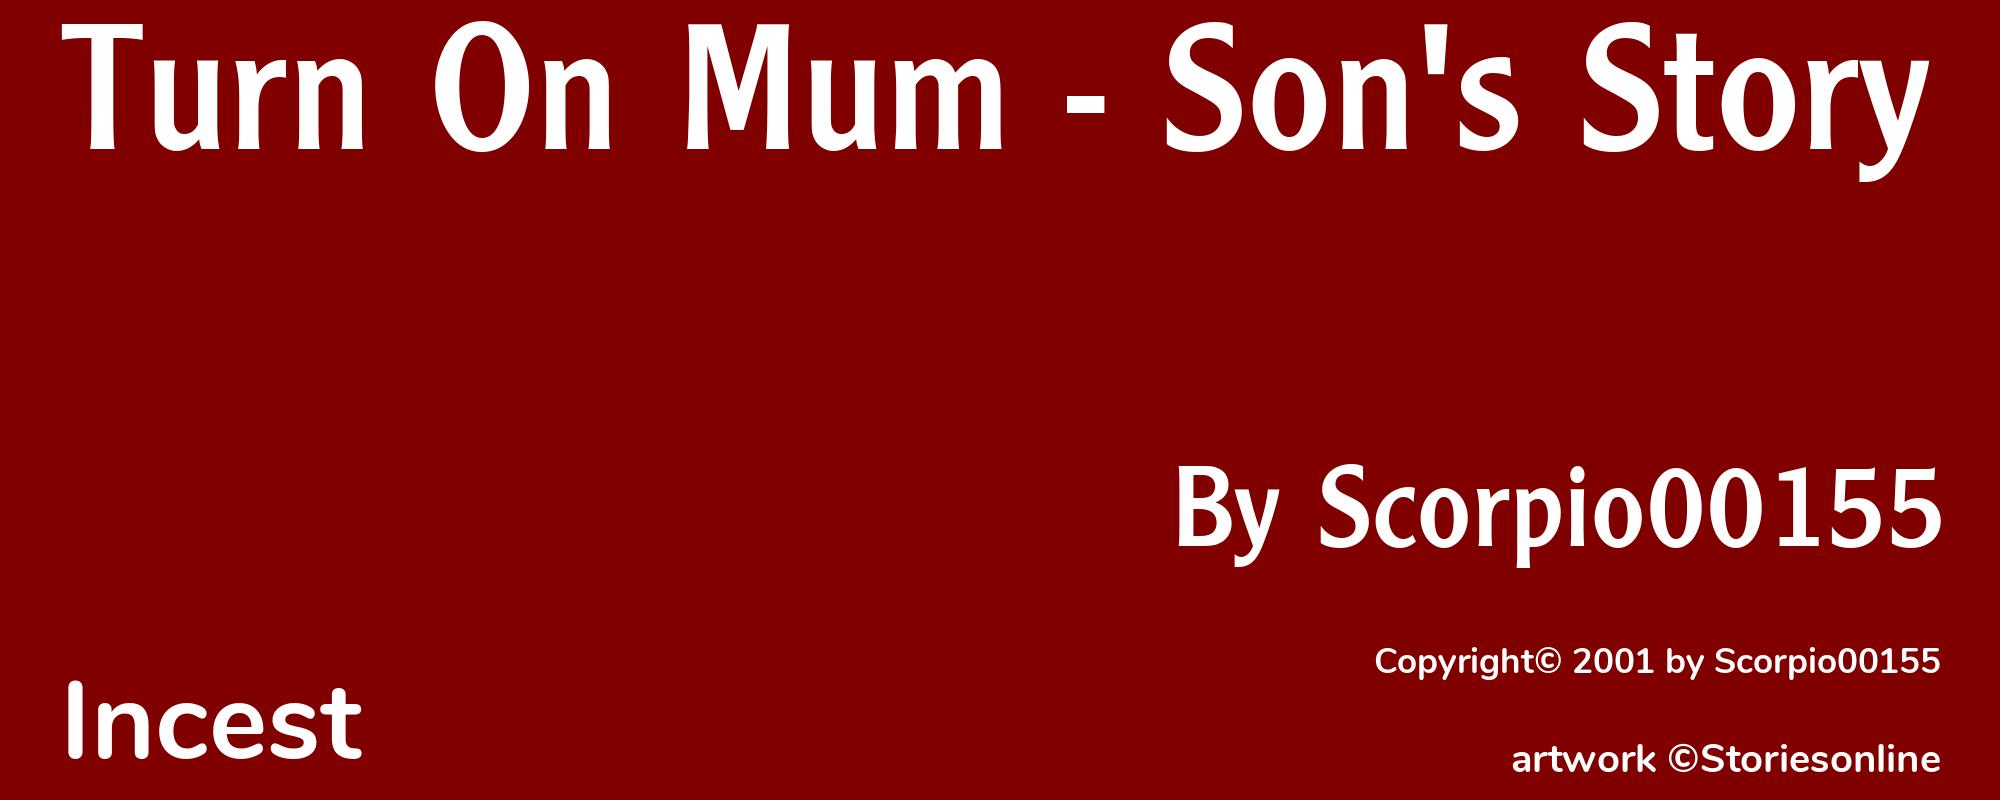 Turn On Mum - Son's Story - Cover